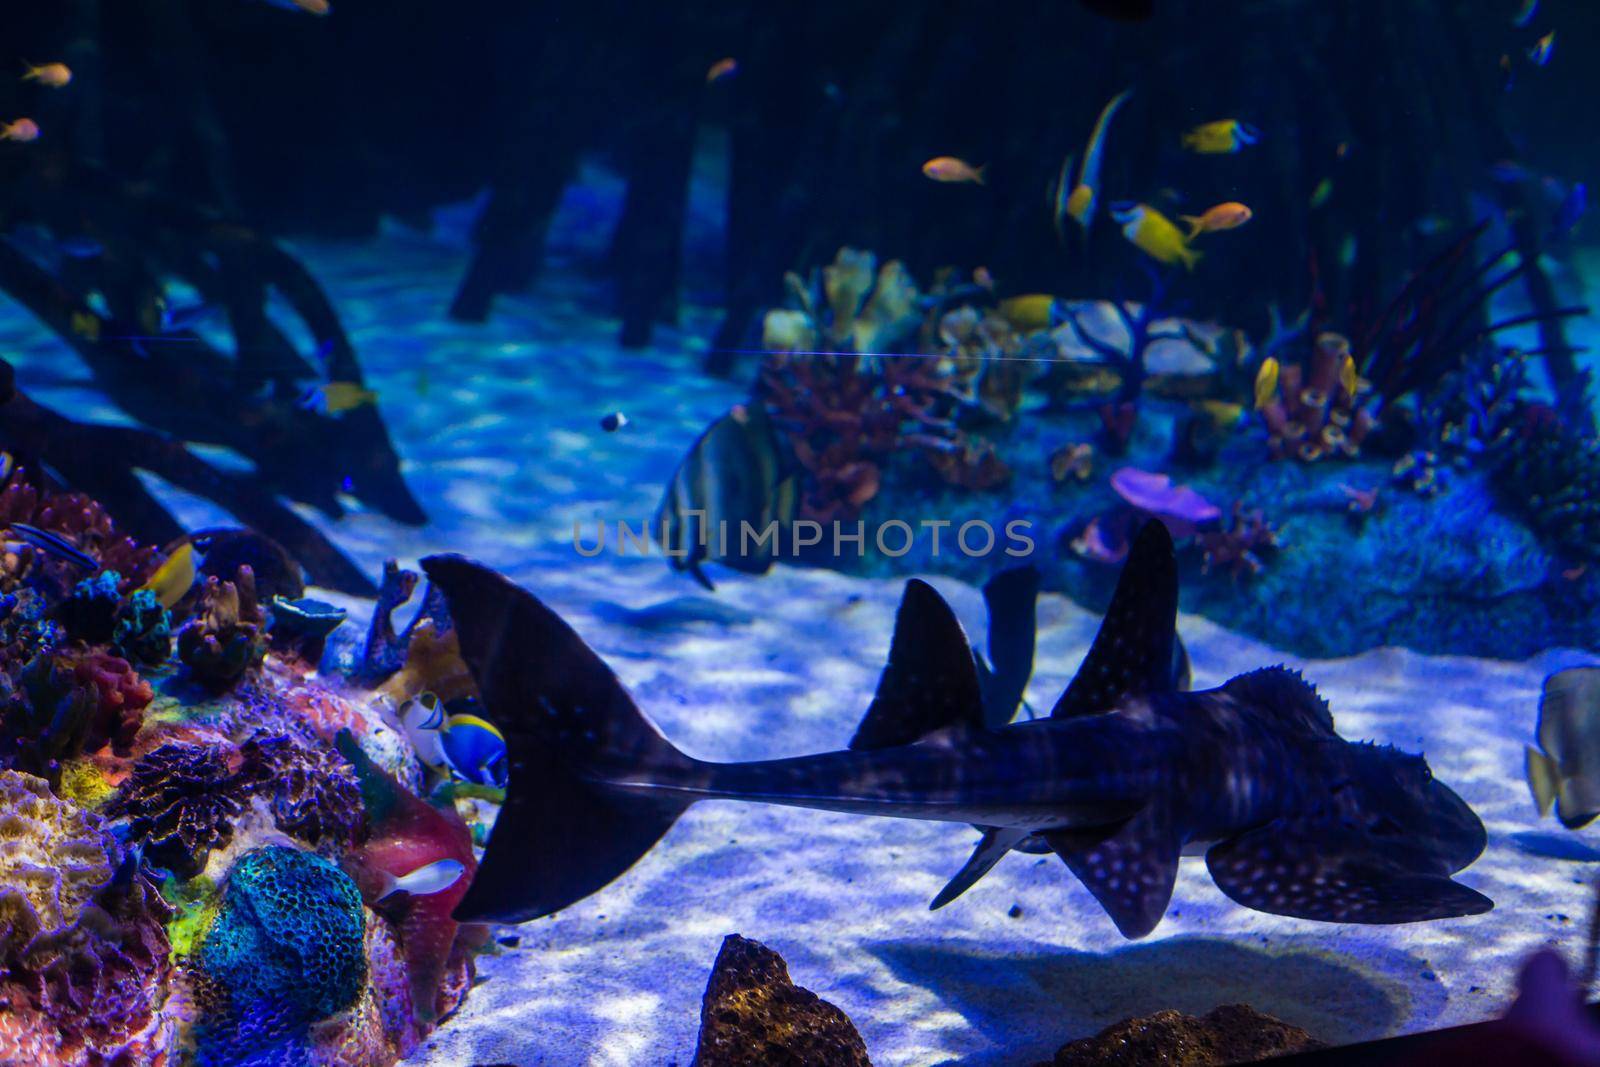 Colorful aquarium, showing different colorful fishes swimming.